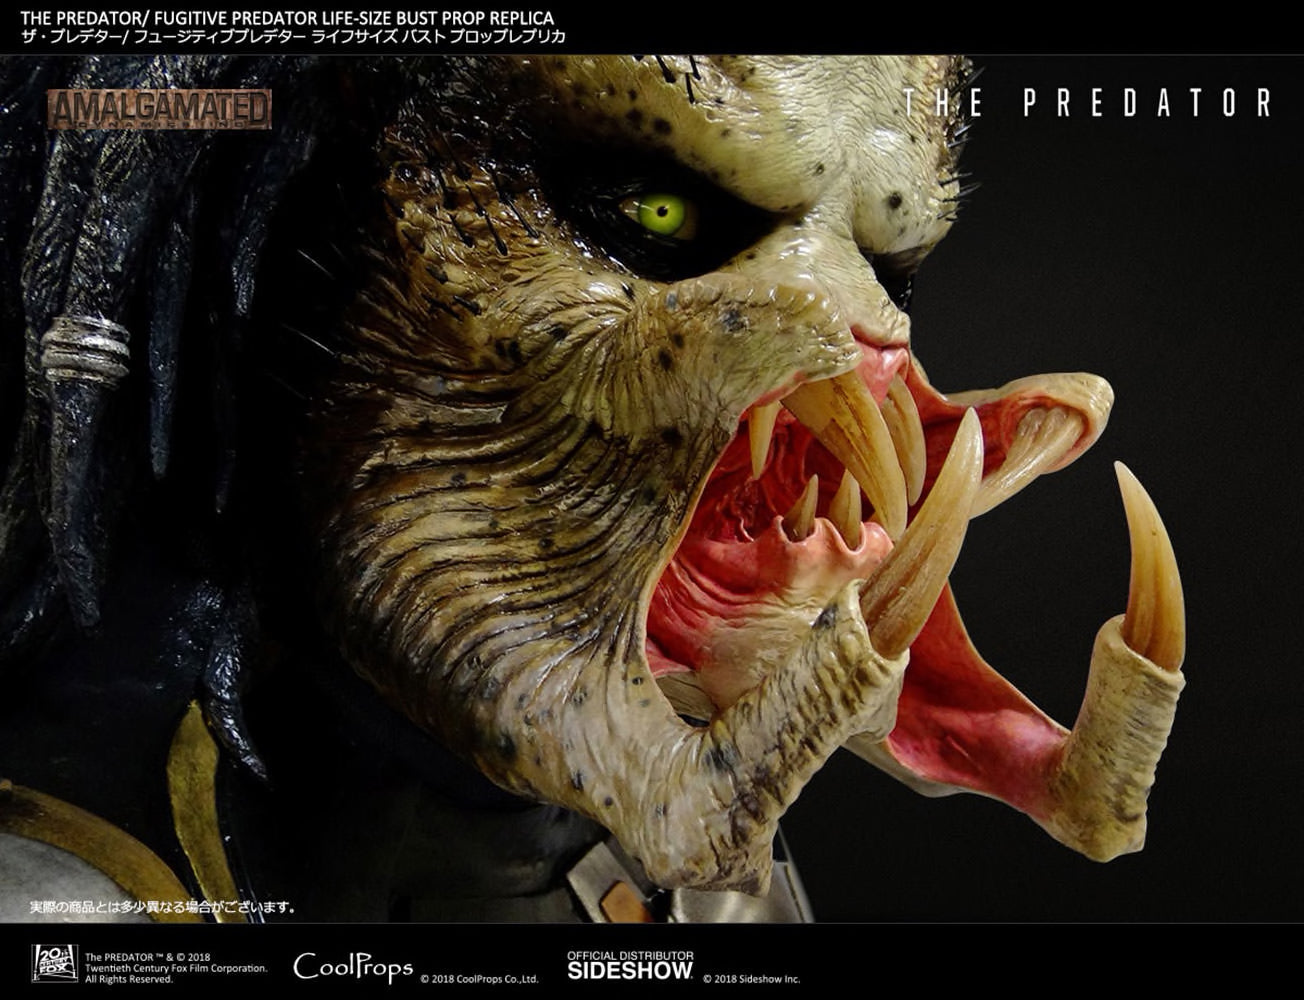 Sideshow Collectibles x CoolProps - Life-Size Bust - The Predator - Fugitive Predator - Marvelous Toys